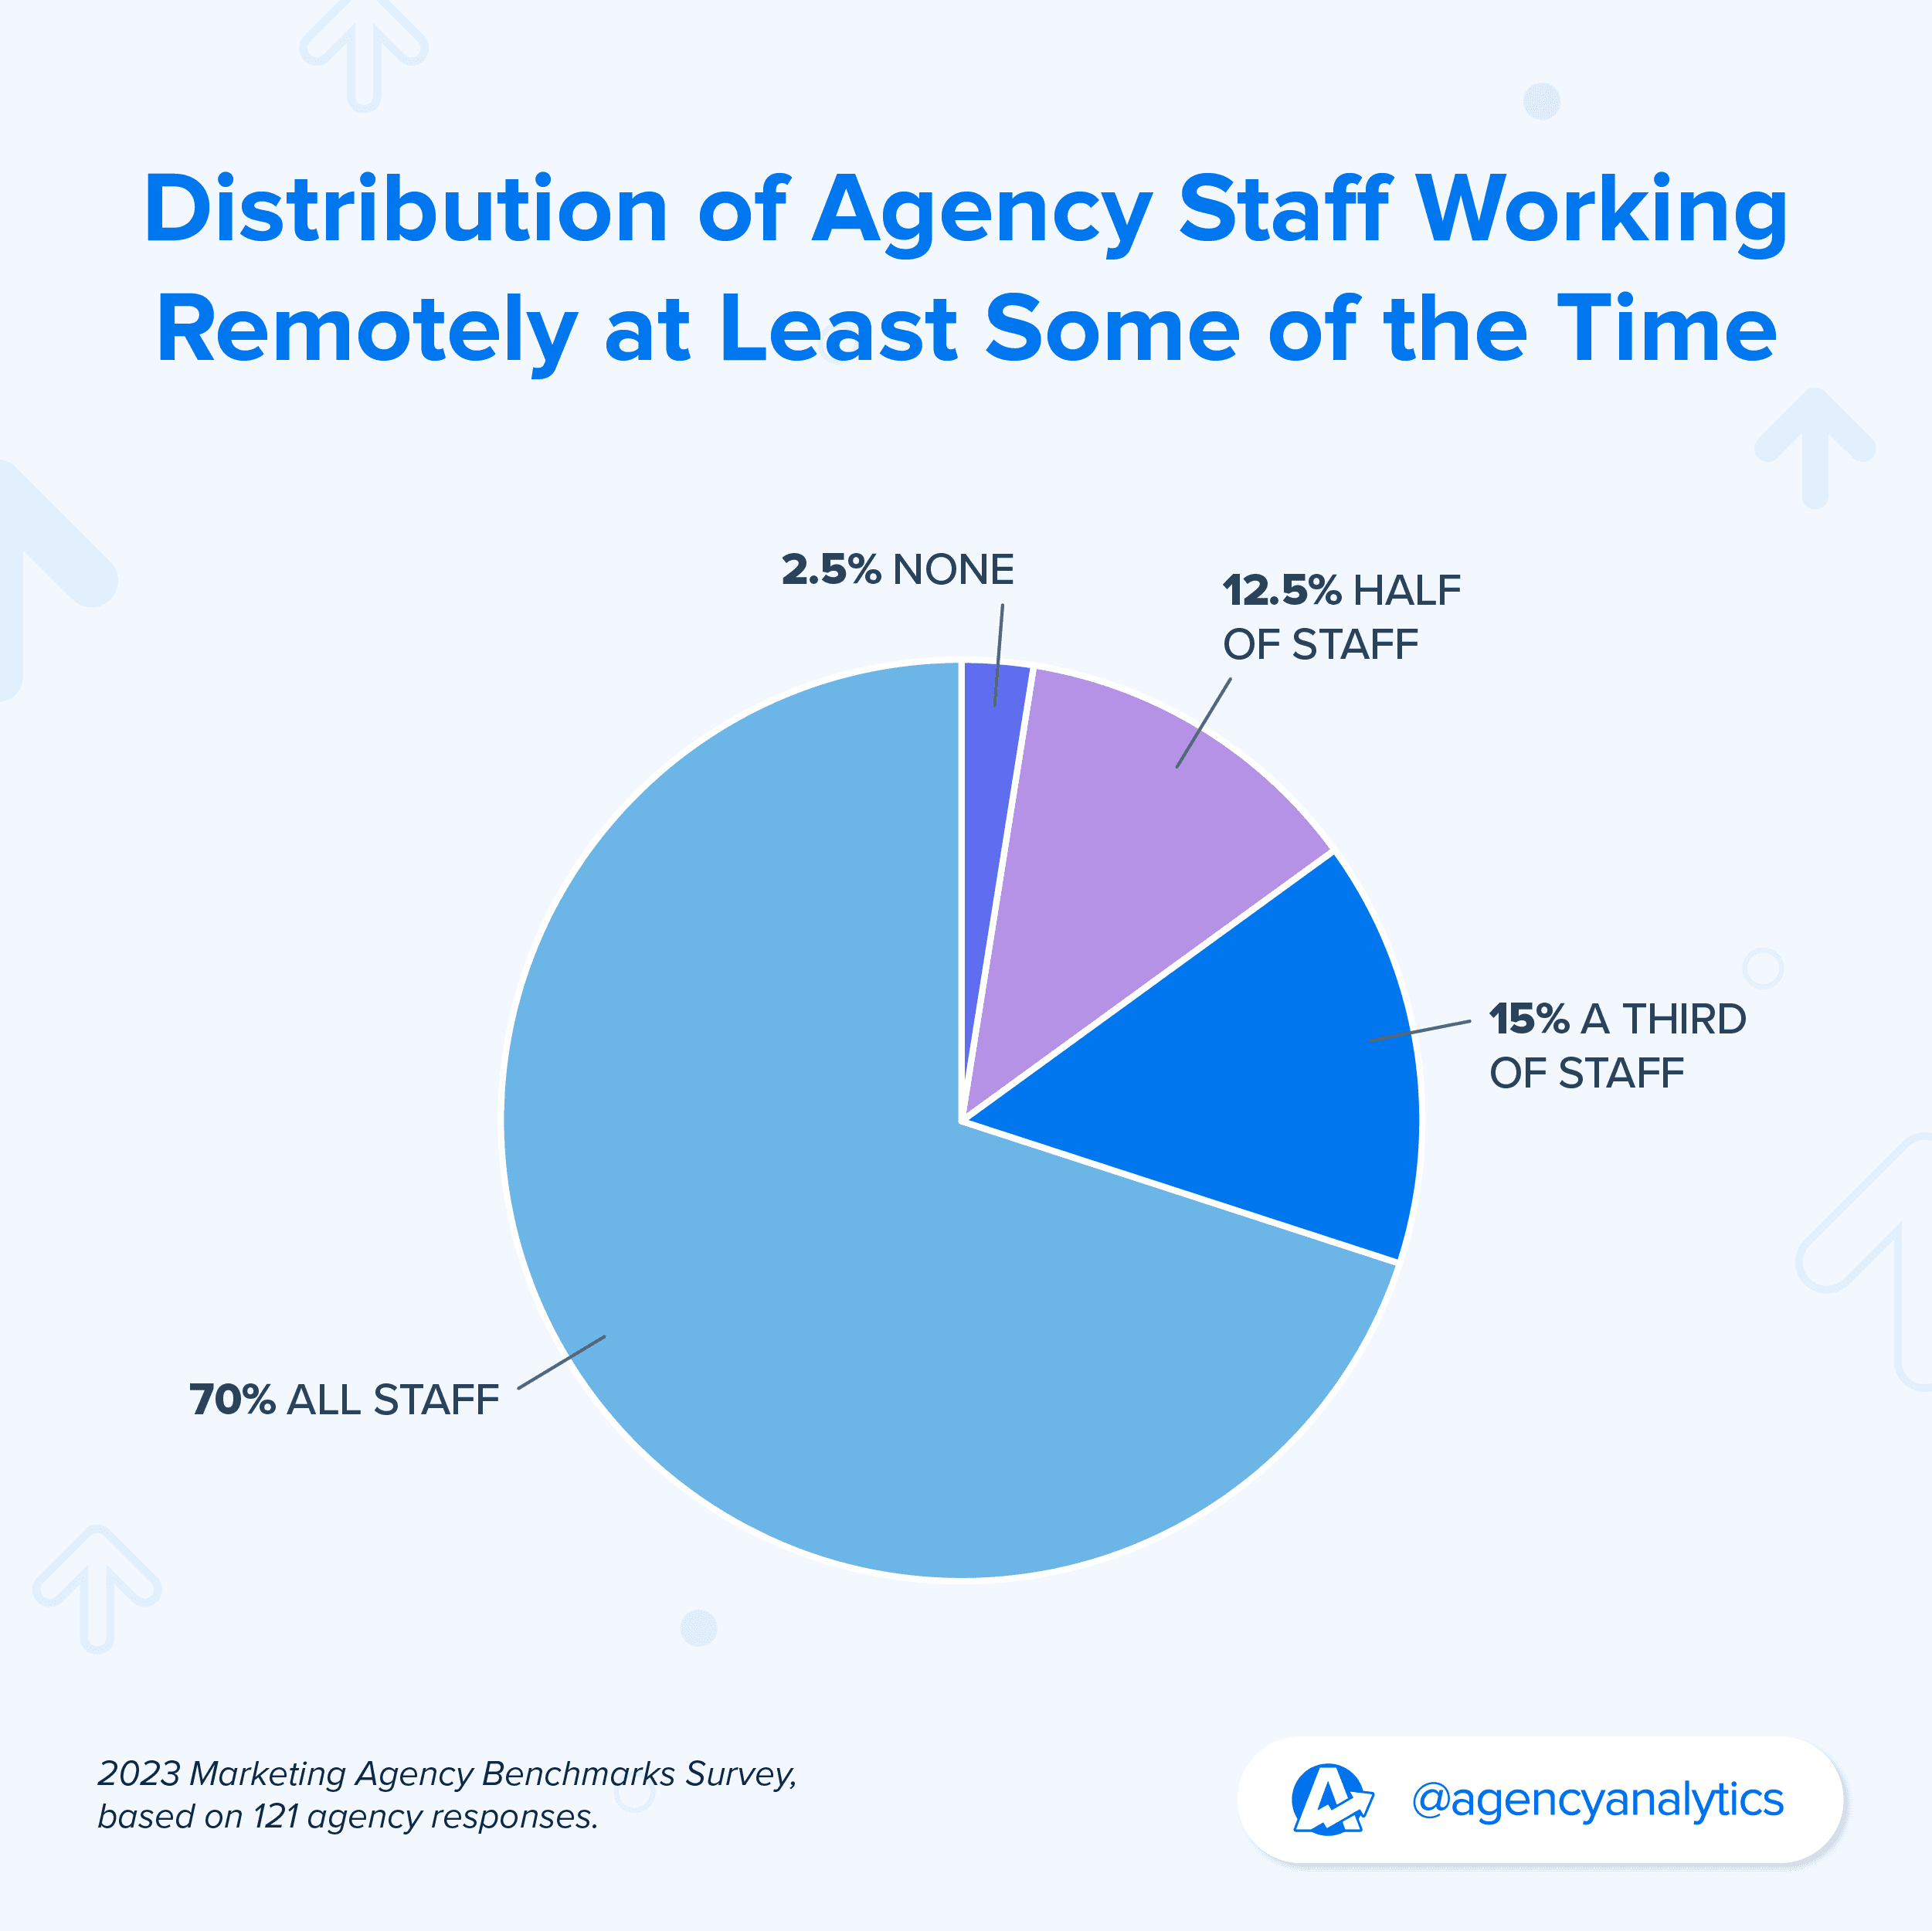 pie chart showing the distribution of marketing agency staff working remotely some of the time 